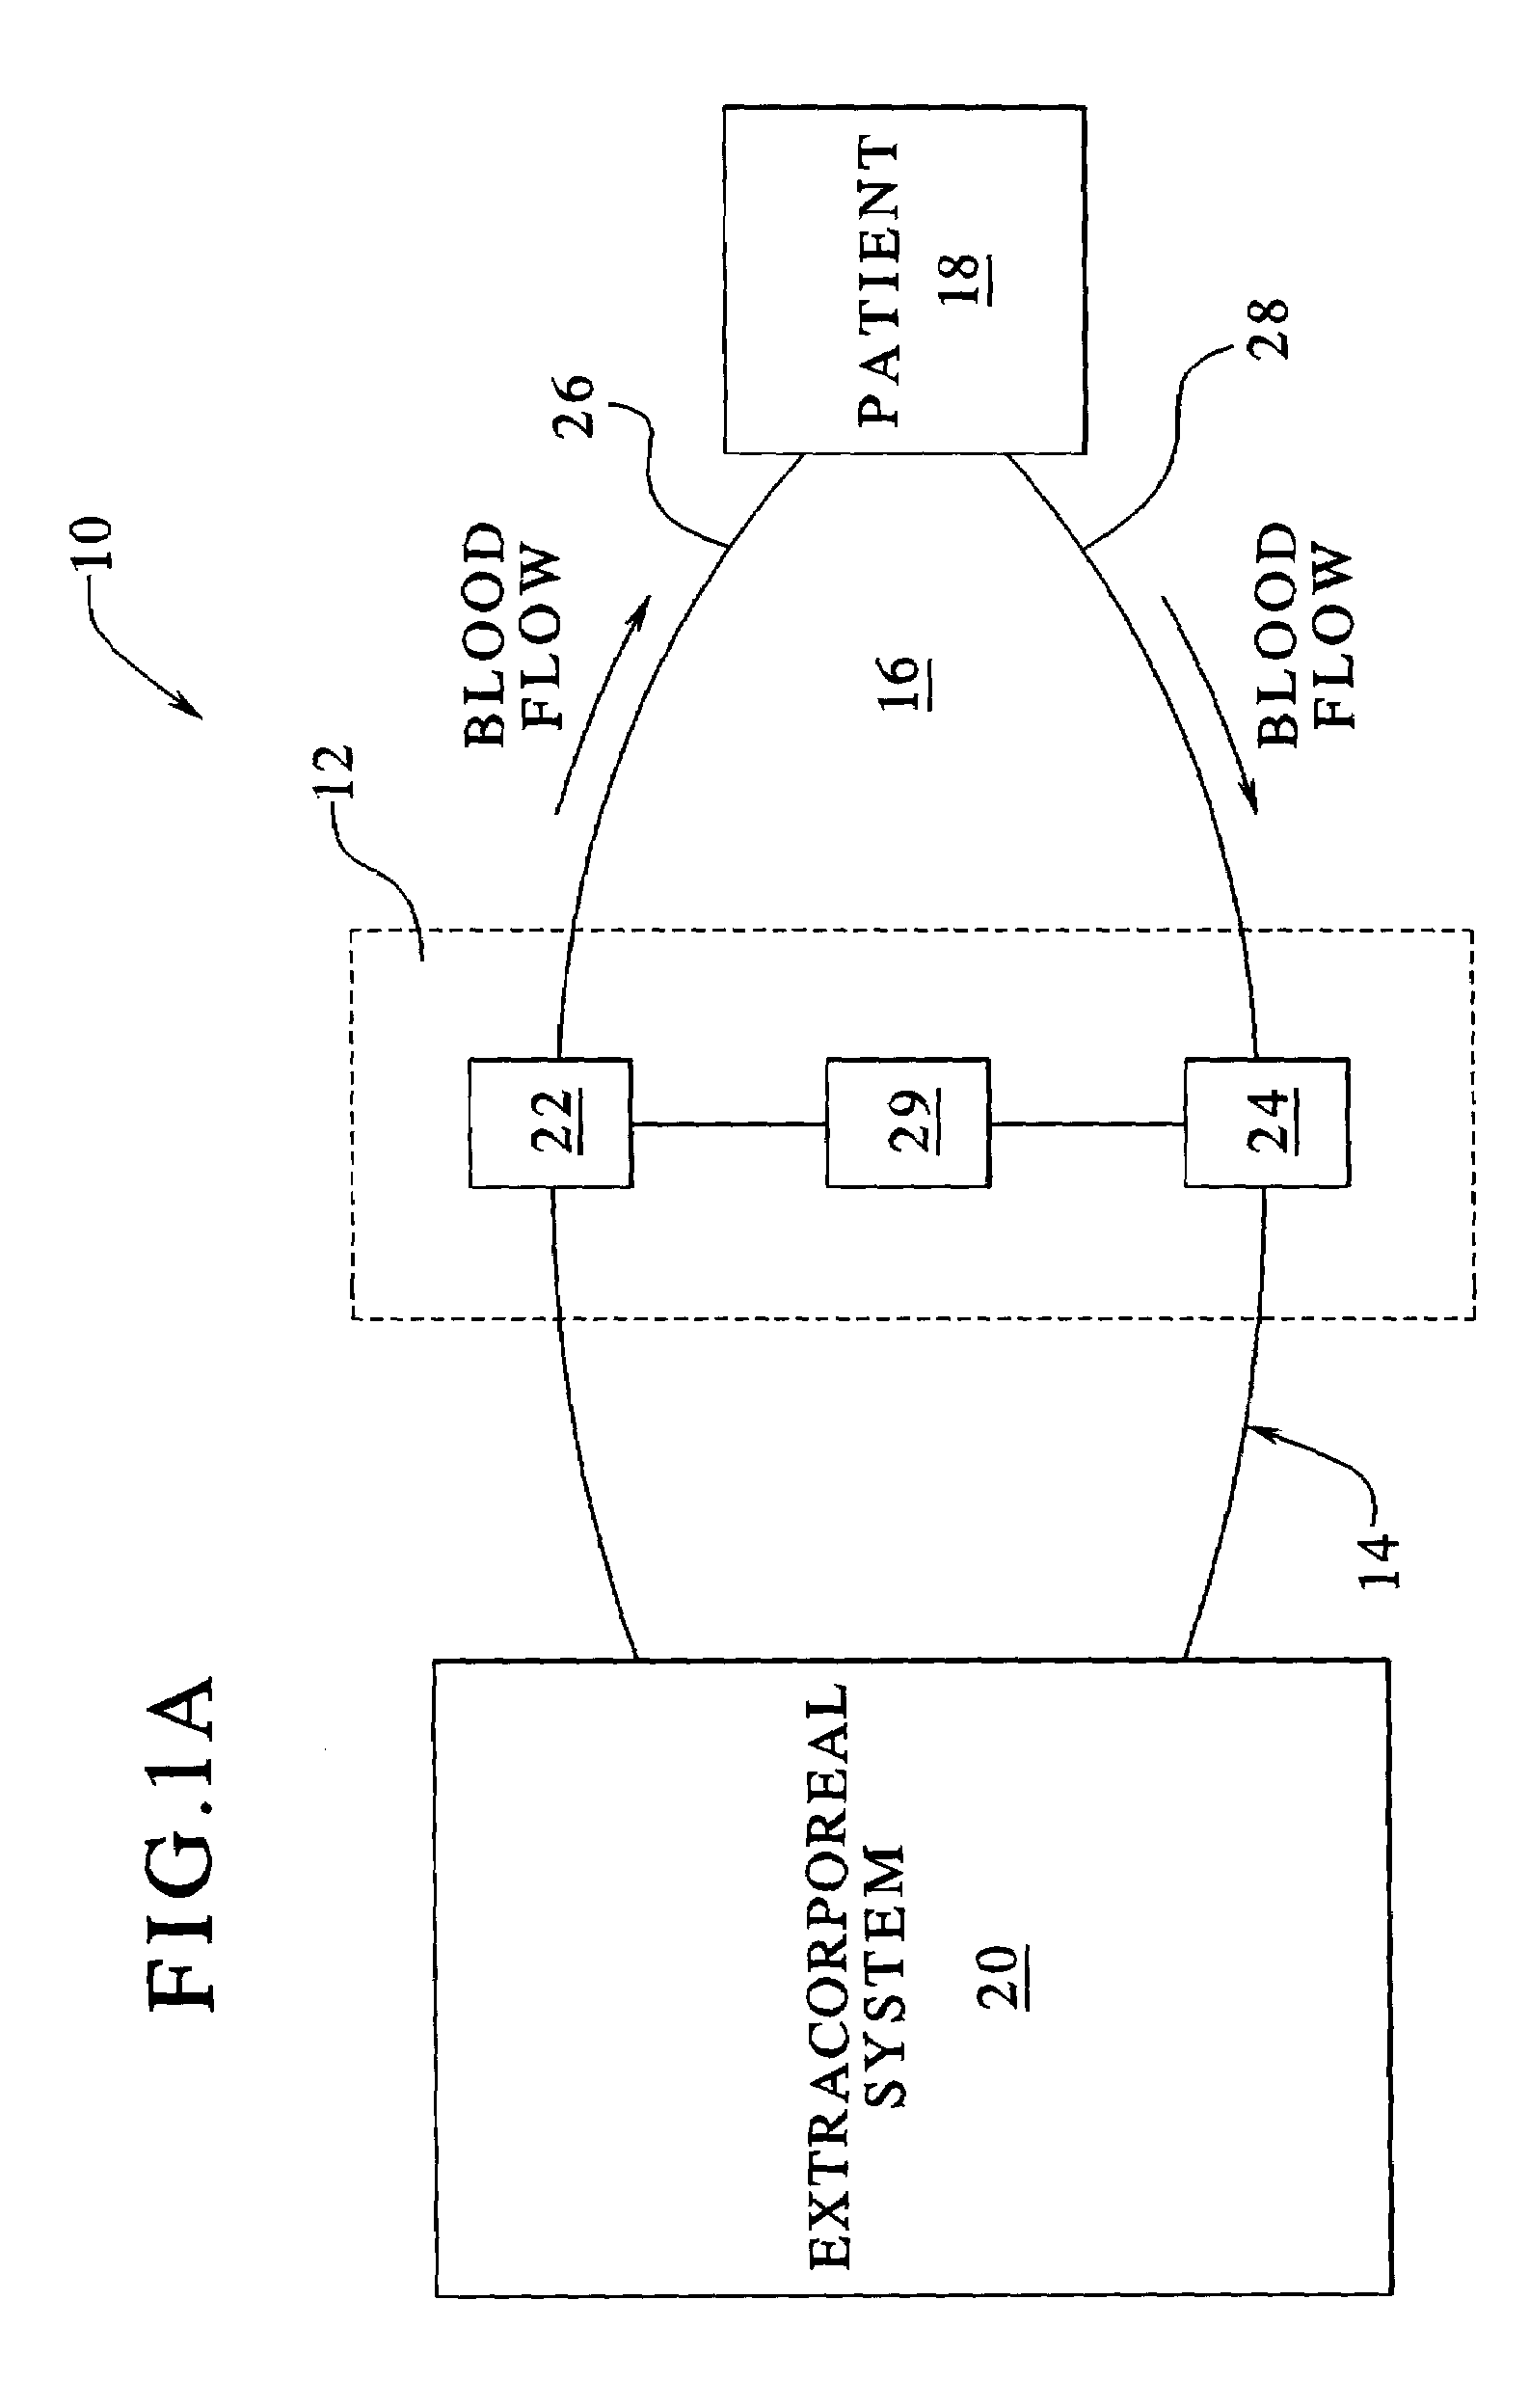 Access disconnection system and methods